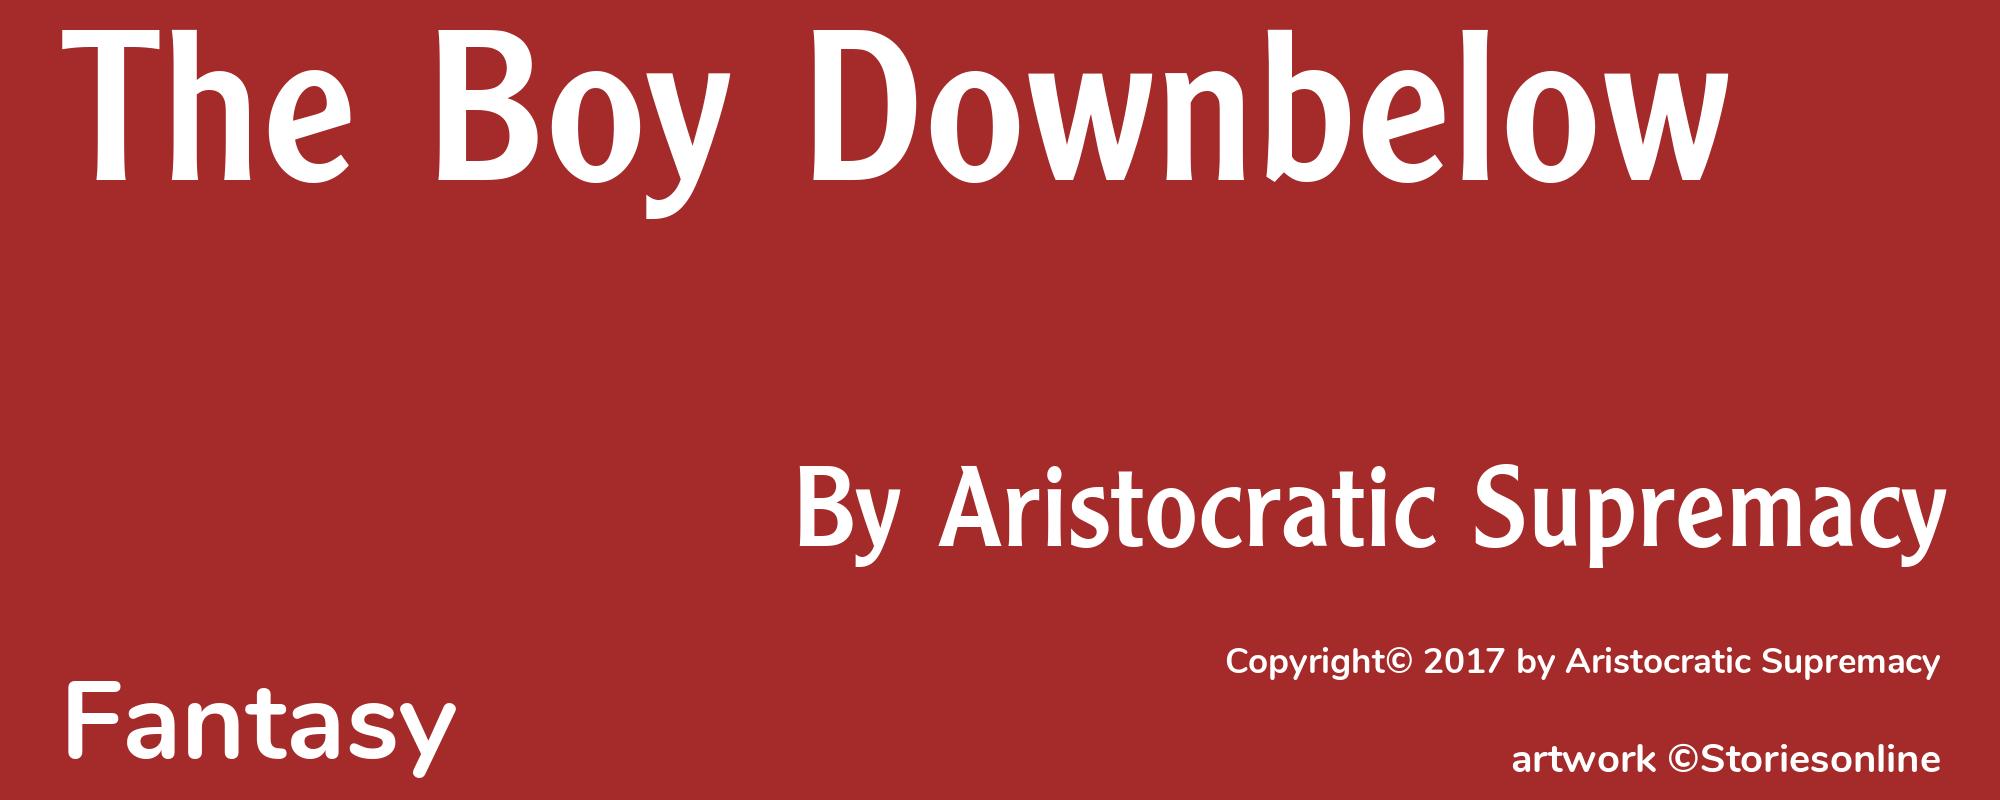 The Boy Downbelow - Cover